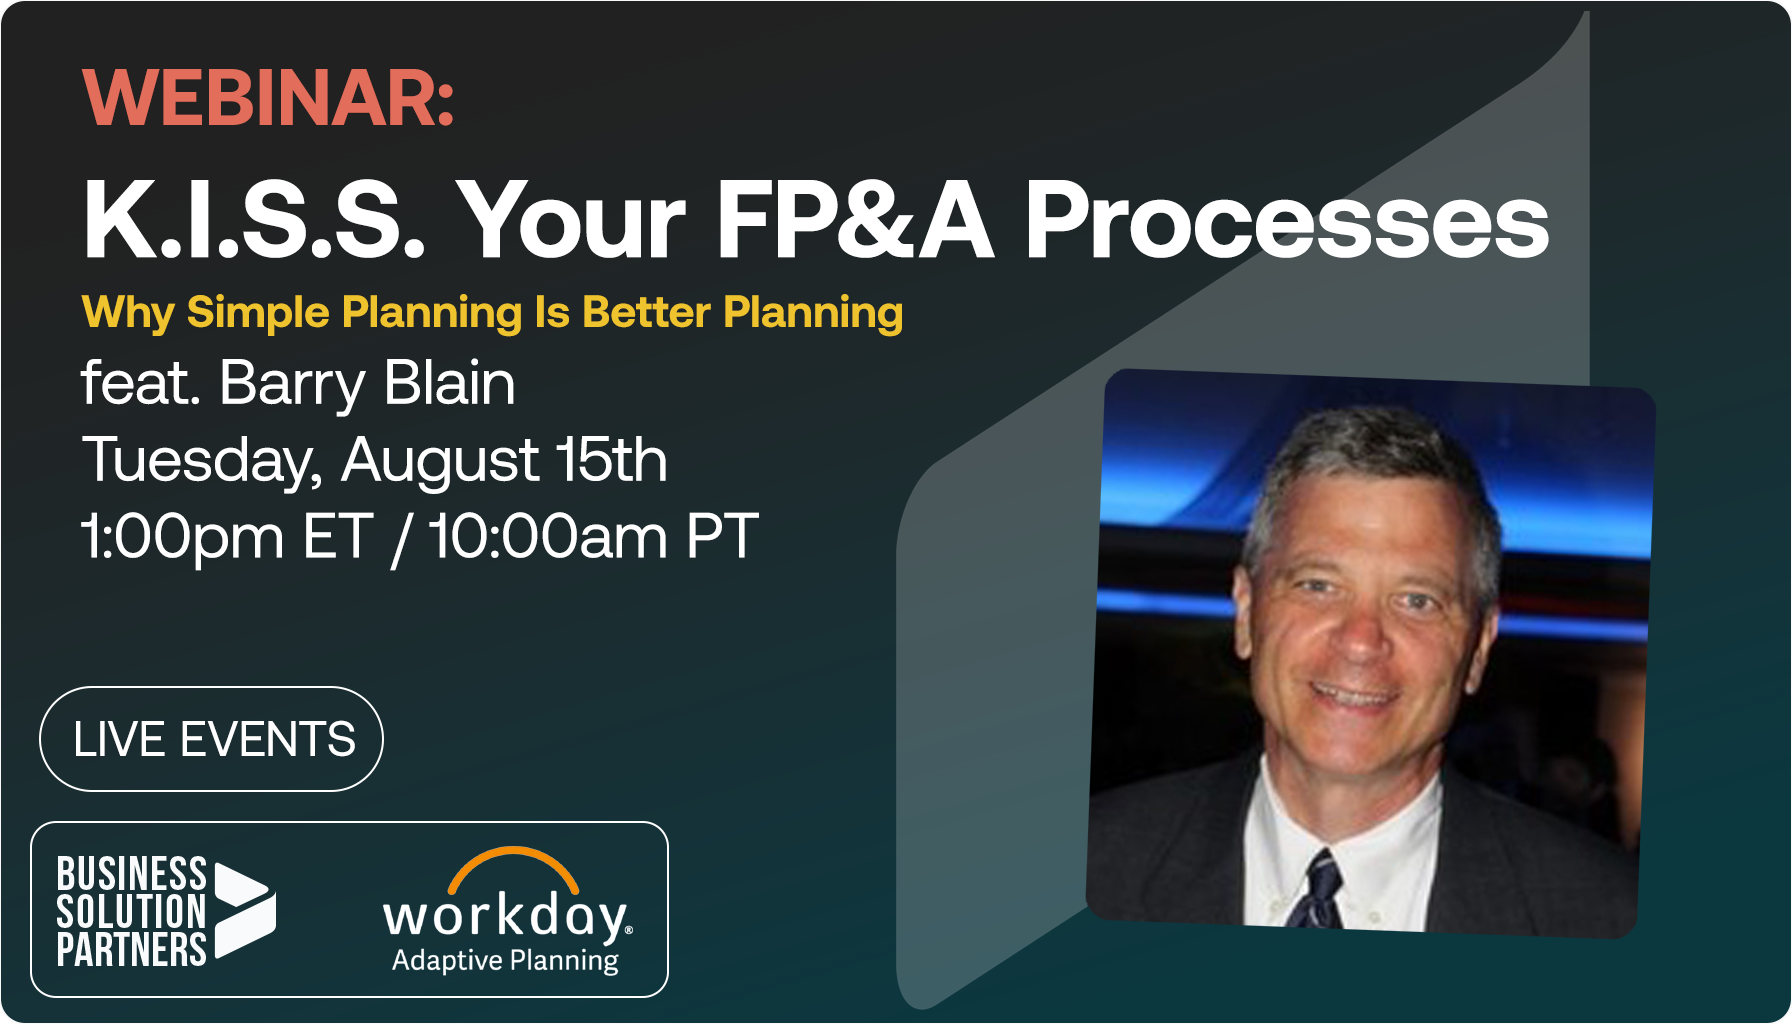 Join our webinar KISS Your FP&A Processes - Why Simple Planning Is Better Planning